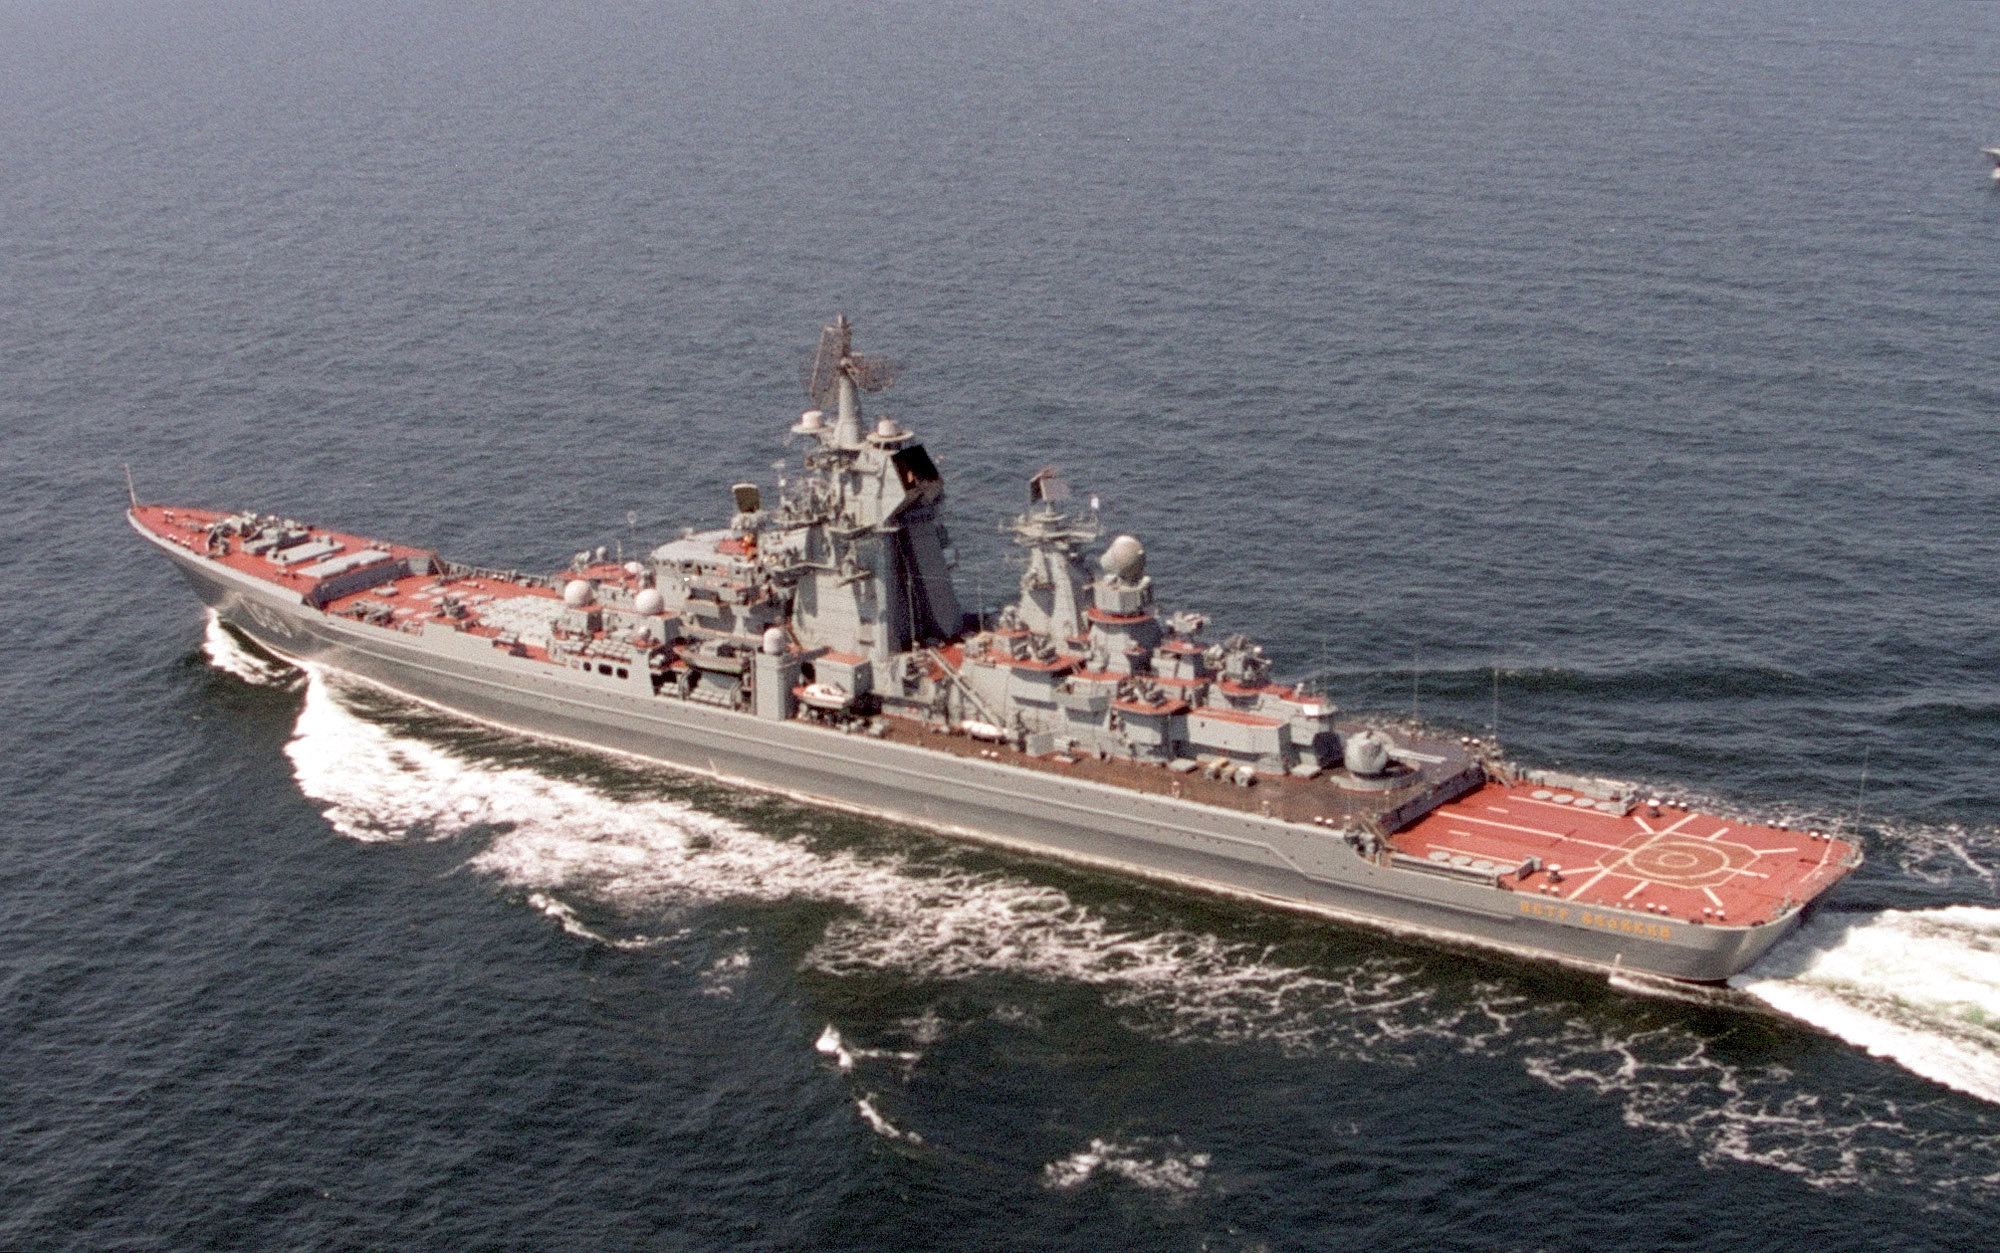 C:\Users\BGauvin\Pictures\Web pages\Soviet\Kirov class.jpg